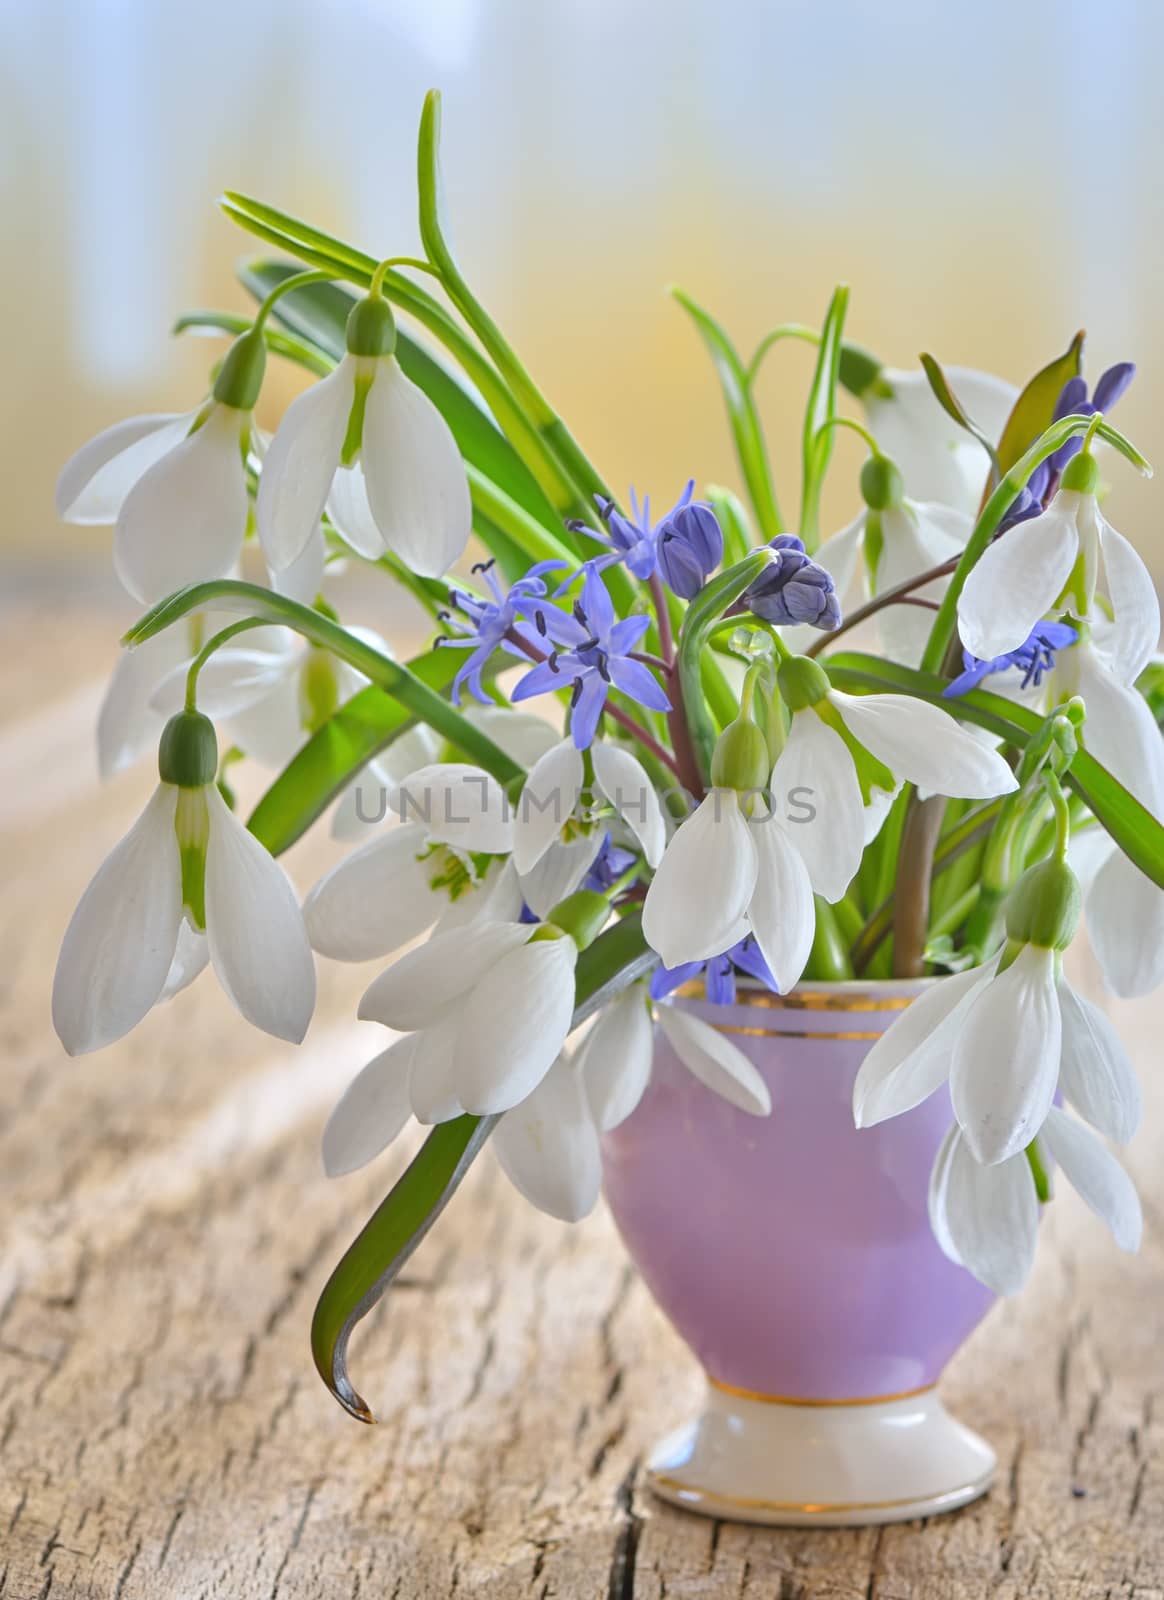 Beautiful bouquet of snowdrops in vase on wooden table